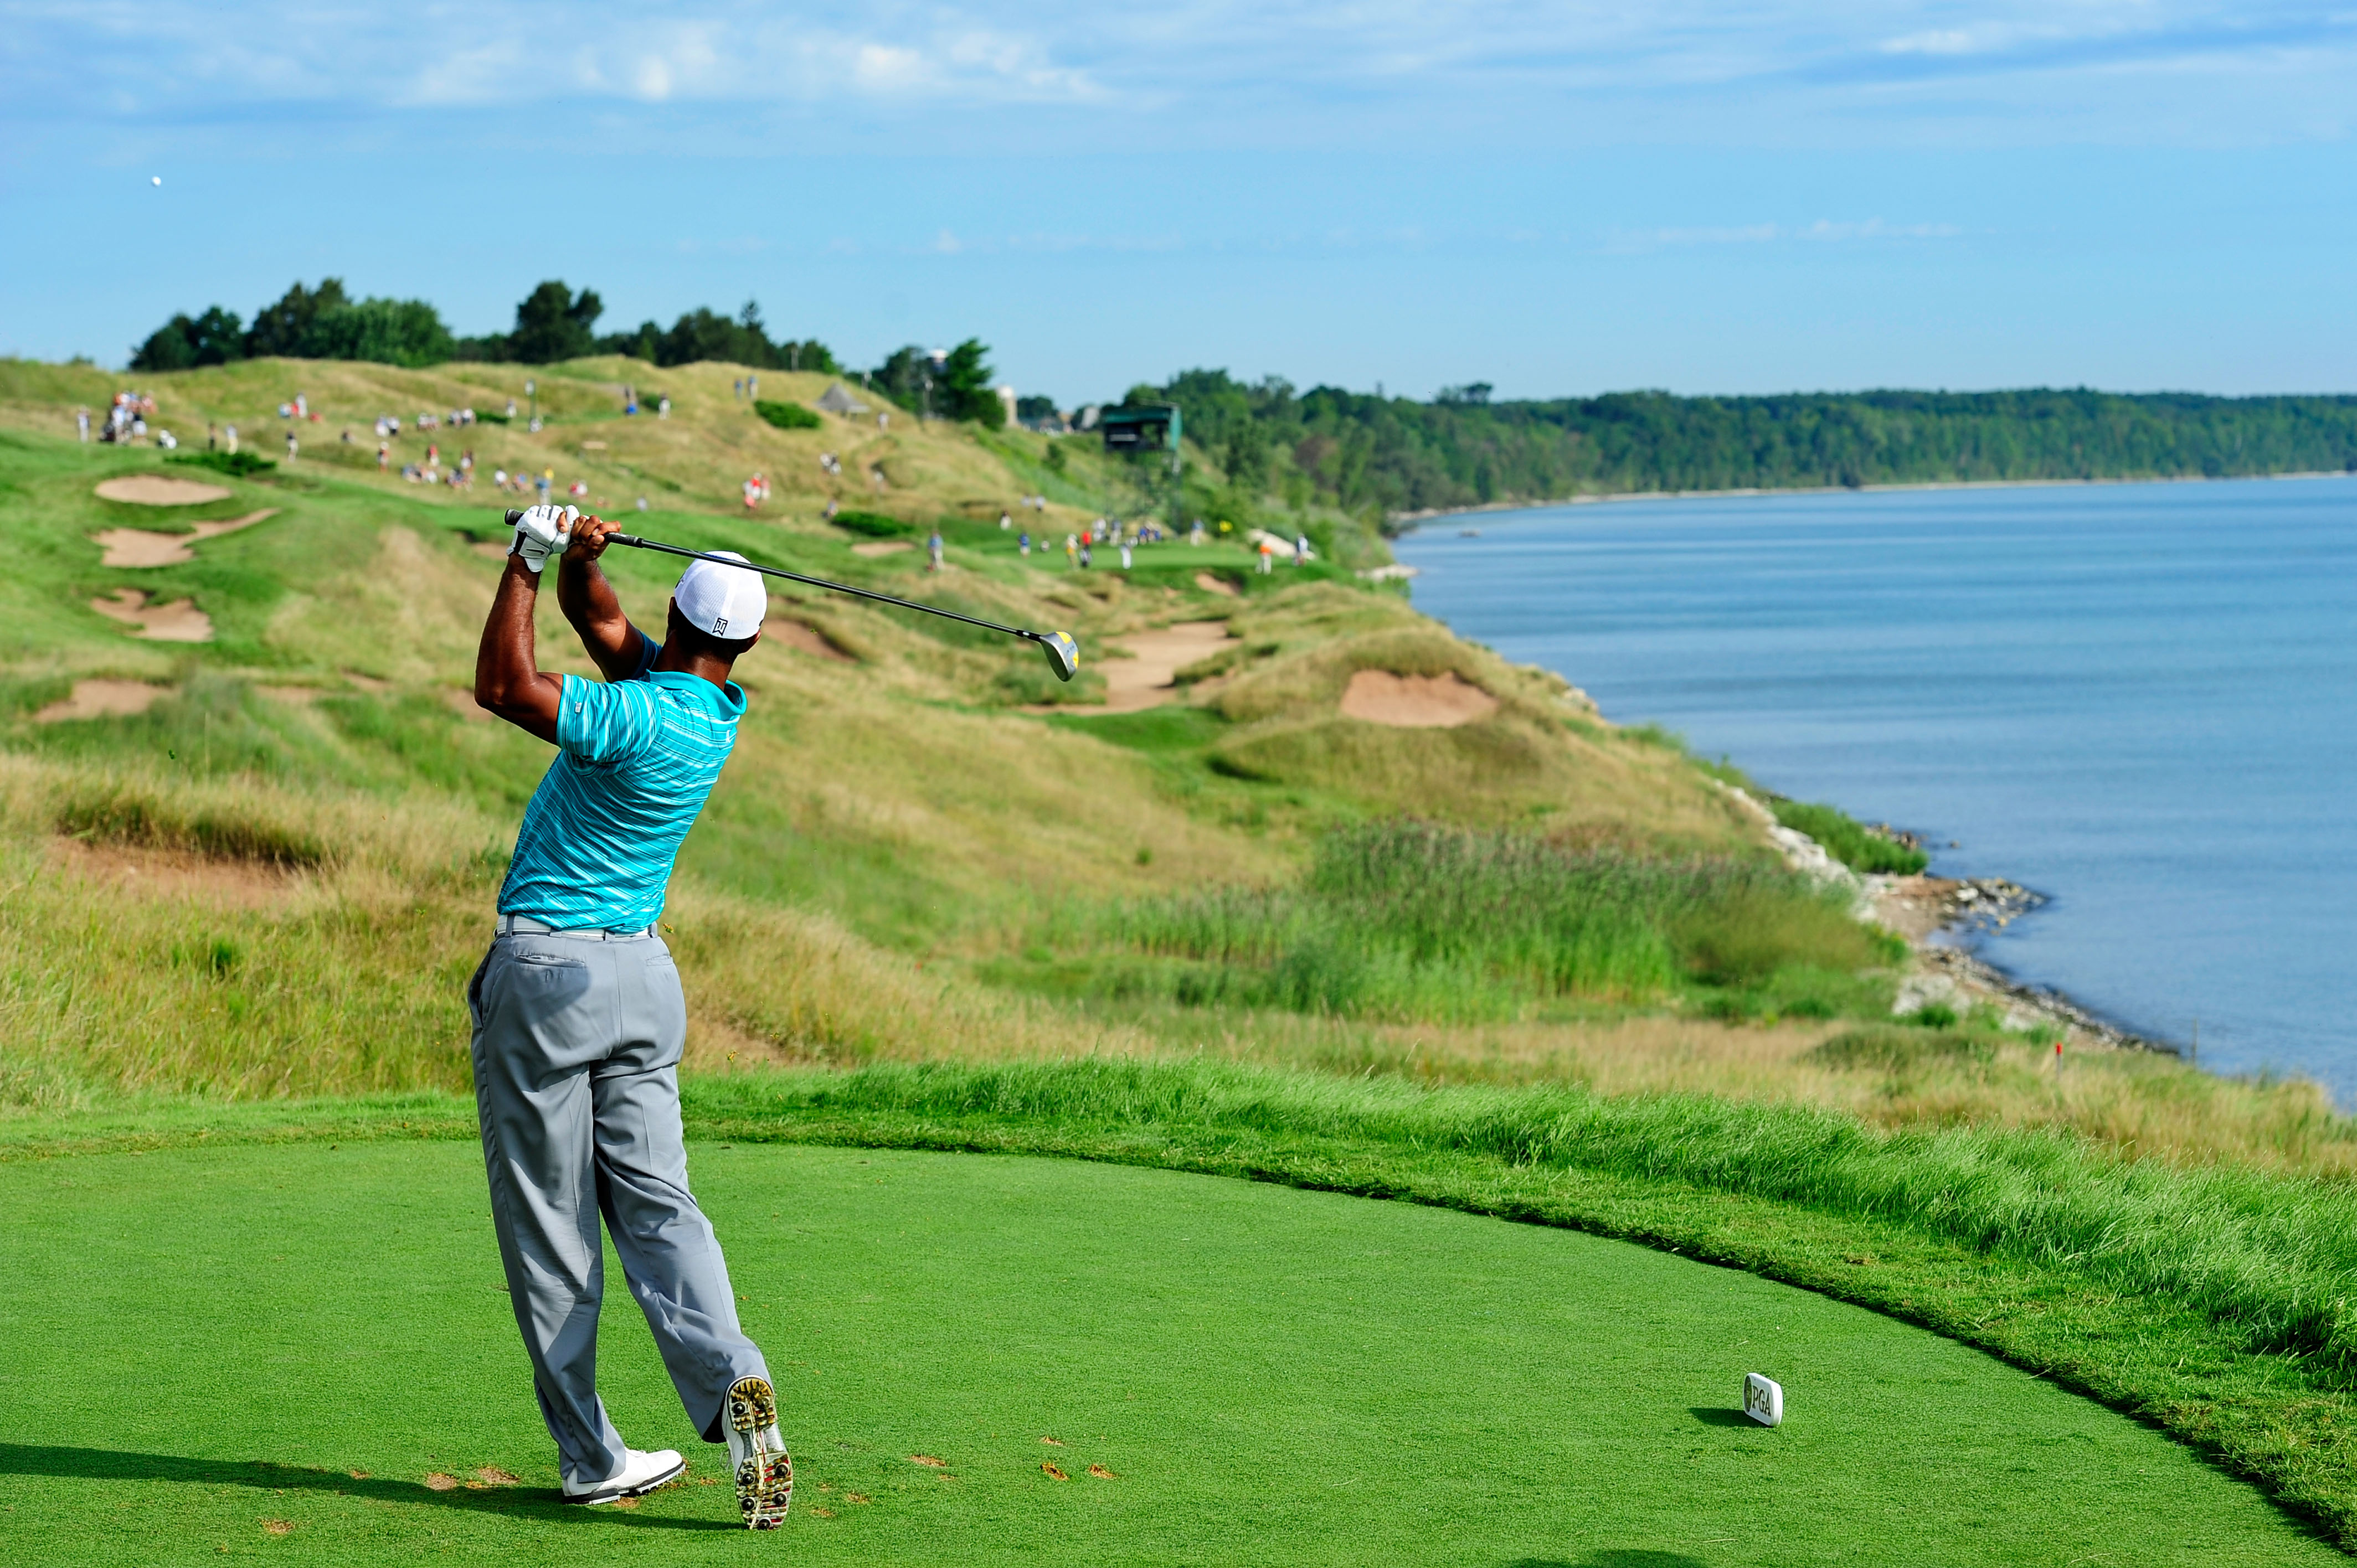 KOHLER, WI - AUGUST 14:  Tiger Woods hits his tee shot on the 13th hole during the continuation of the second round of the 92nd PGA Championship on the Straits Course at Whistling Straits on August 14, 2010 in Kohler, Wisconsin.  (Photo by Stuart Franklin